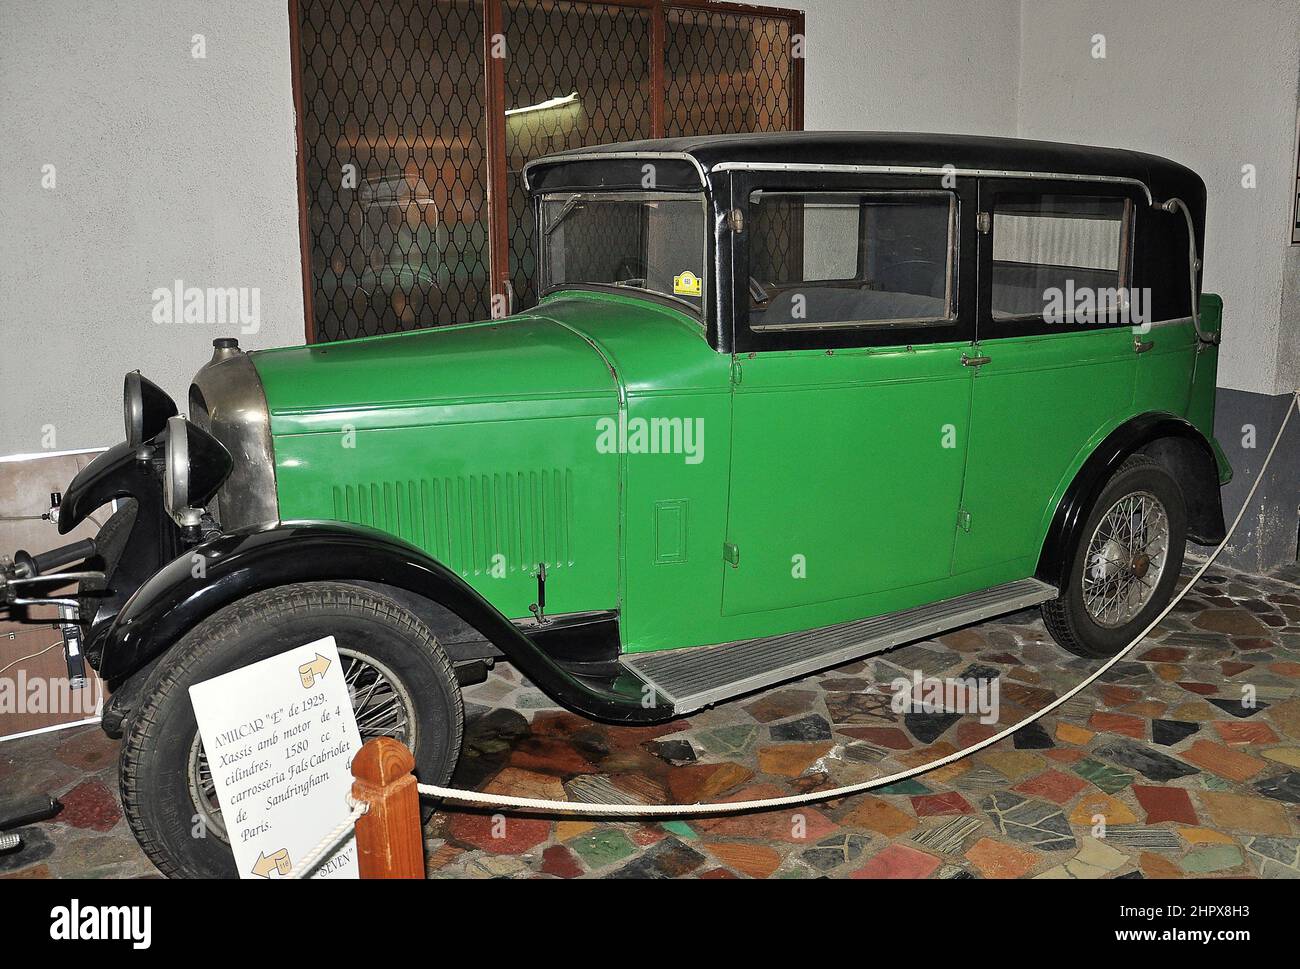 Car Amilcar Type E/1925-Salvador Claret's collection of cars and motorcycles in Sils, Barcelona, Catalonia, Spain Stock Photo